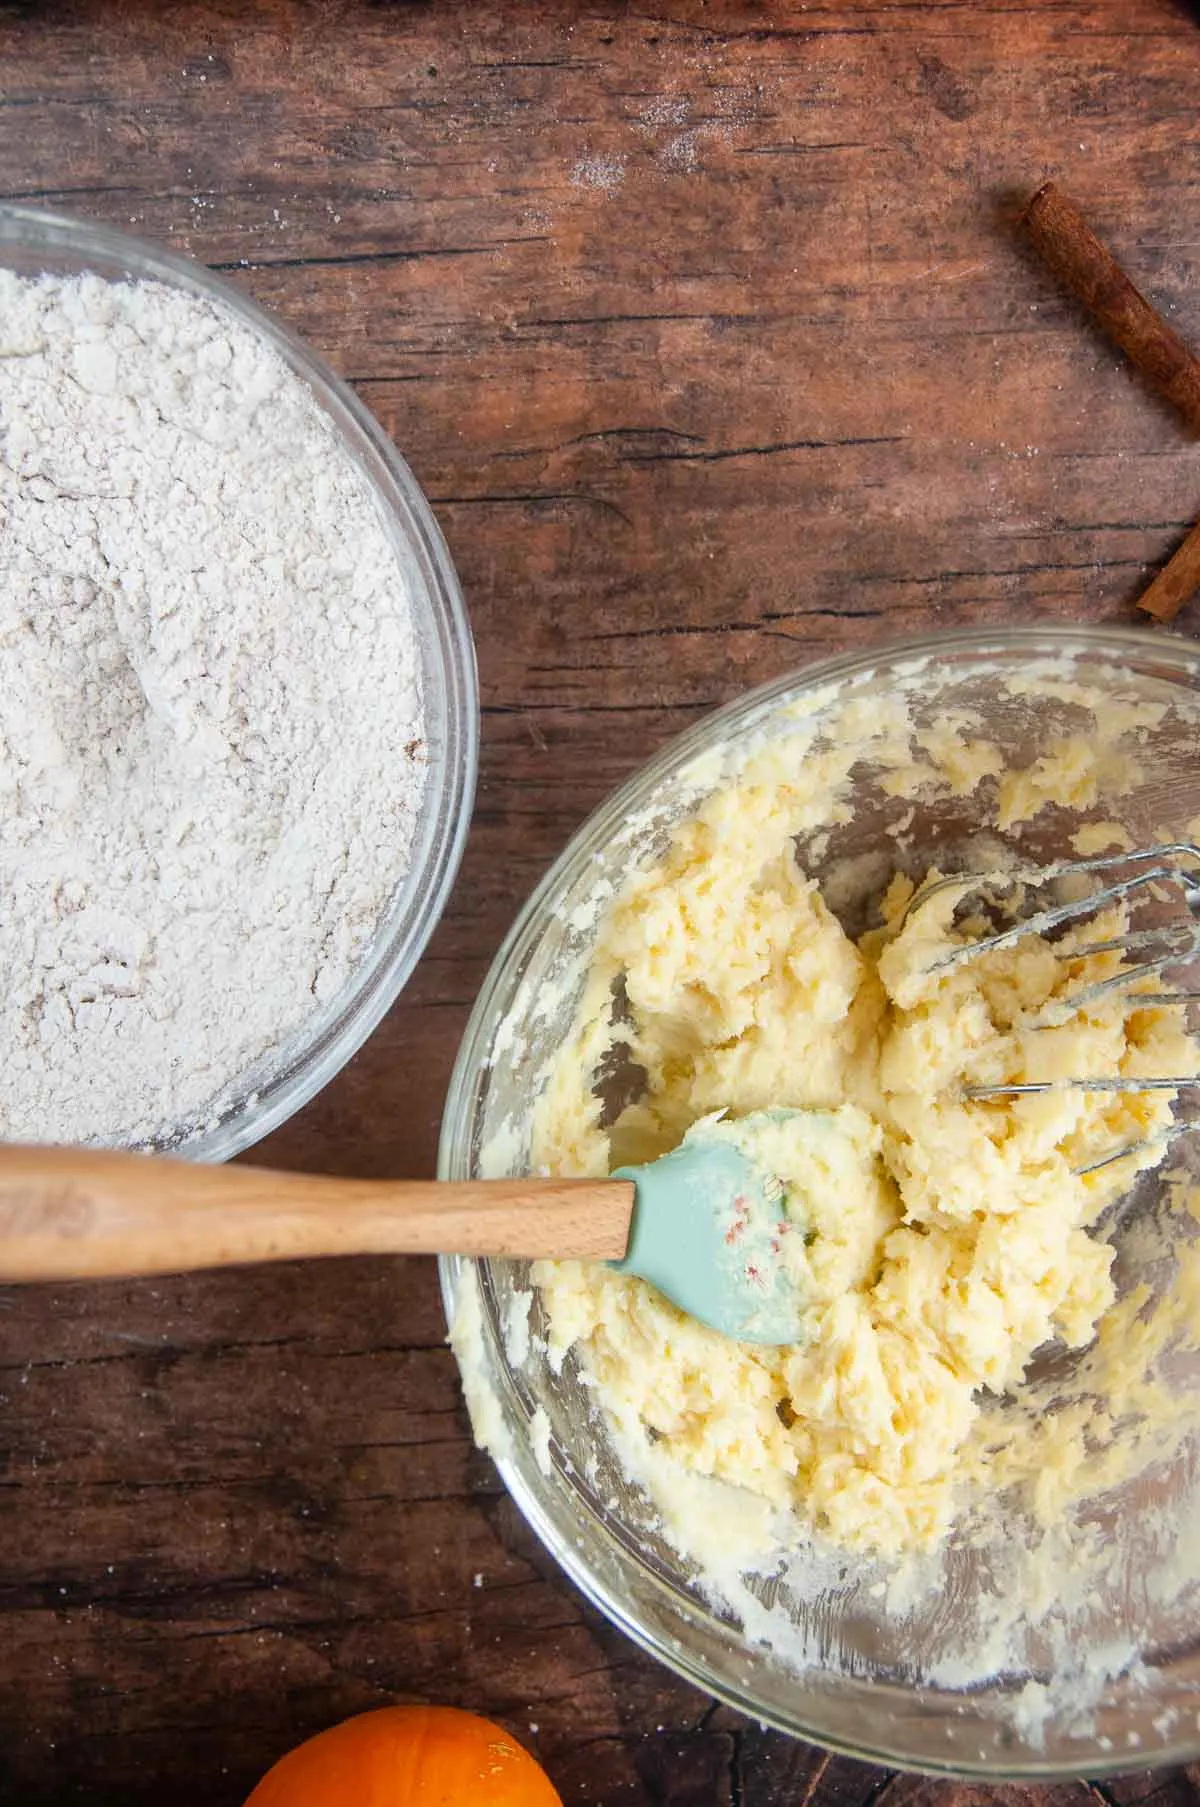 Cream together the butter, sugar, egg, and vanilla in one bowl and whisk together the dry ingredients in another.